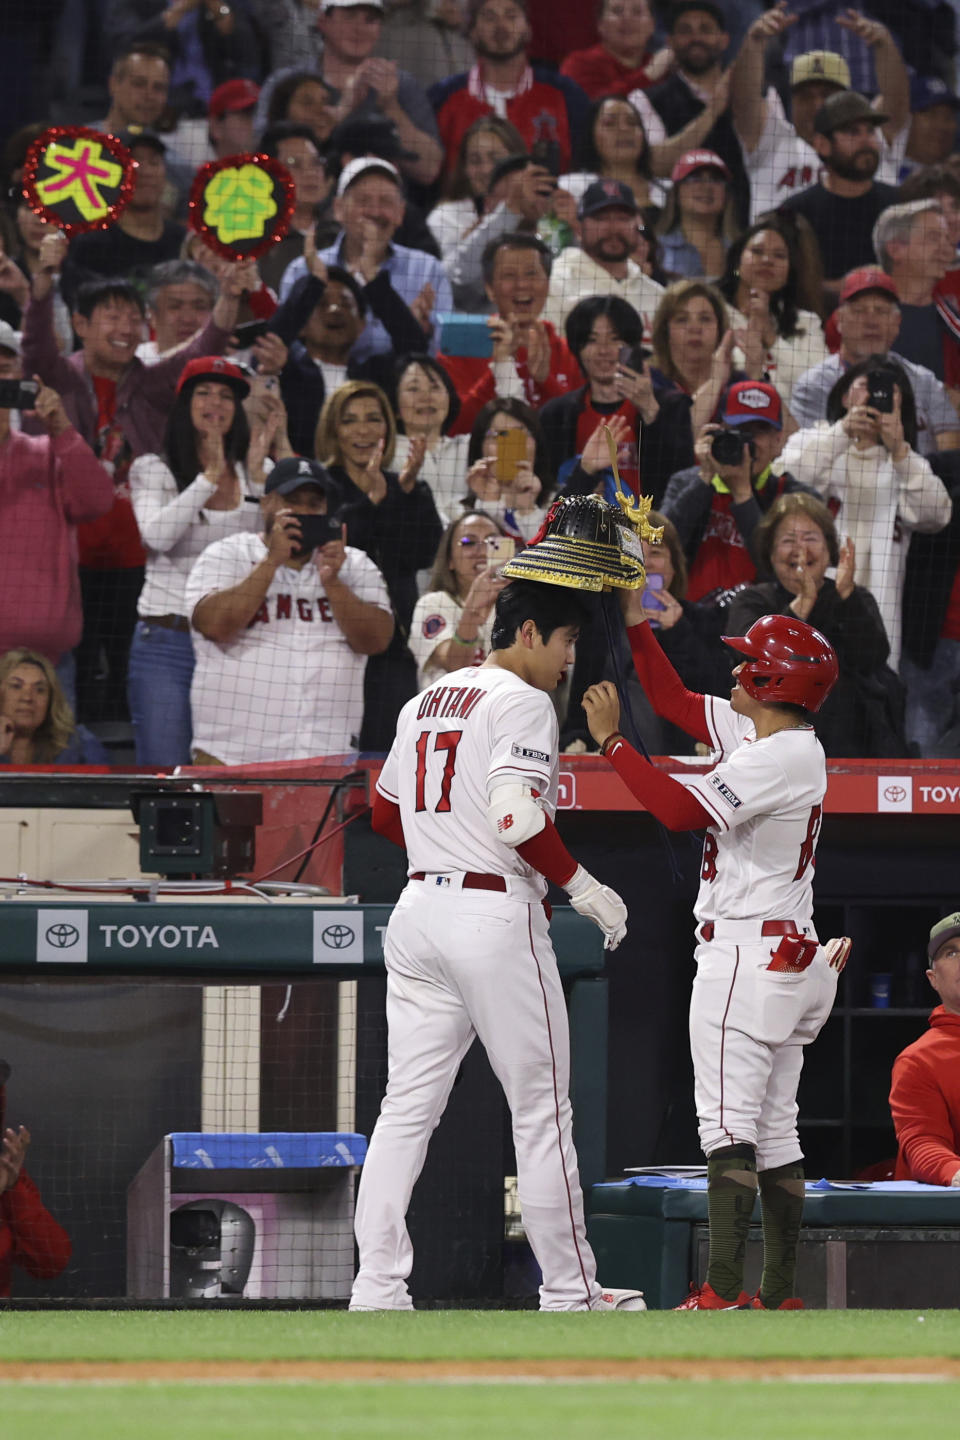 Los Angeles Angels designated hitter Shohei Ohtani (17) celebrates with the bat boy after hitting a home run during the sixth inning of a baseball game against the Minnesota Twins in Anaheim, Calif., Saturday, May 20, 2023. (AP Photo/Jessie Alcheh)